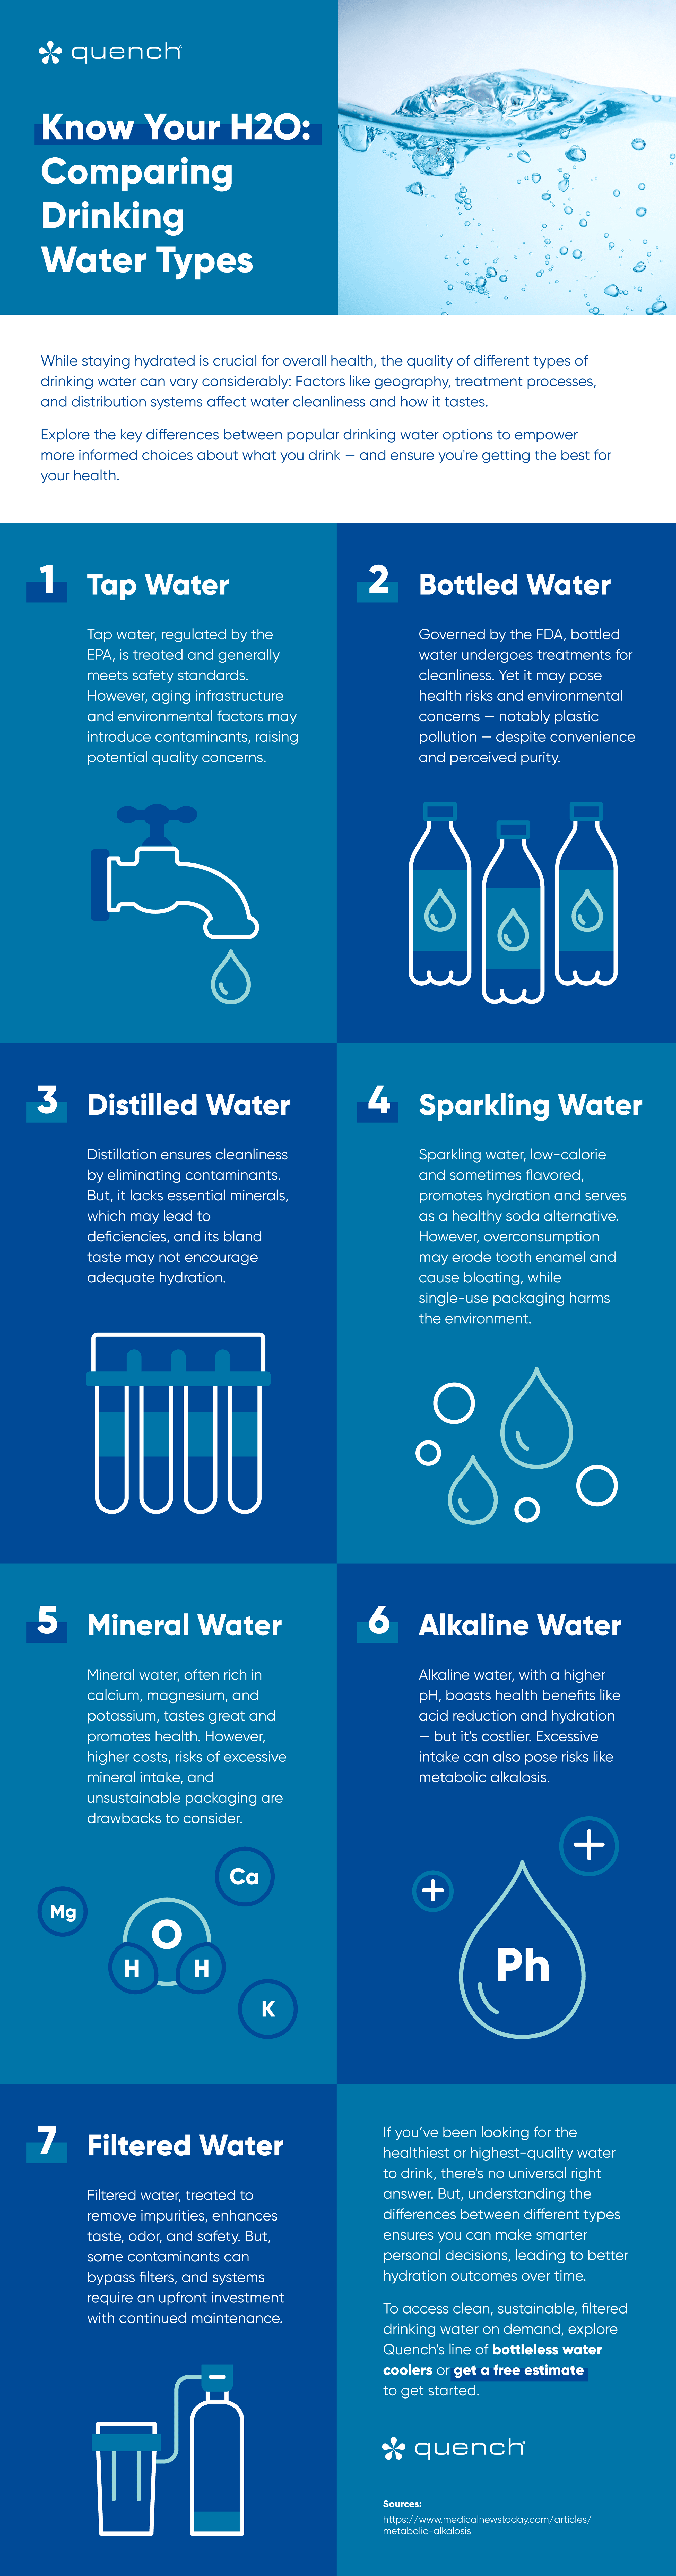 Infographic: Comparing Drinking Water Types